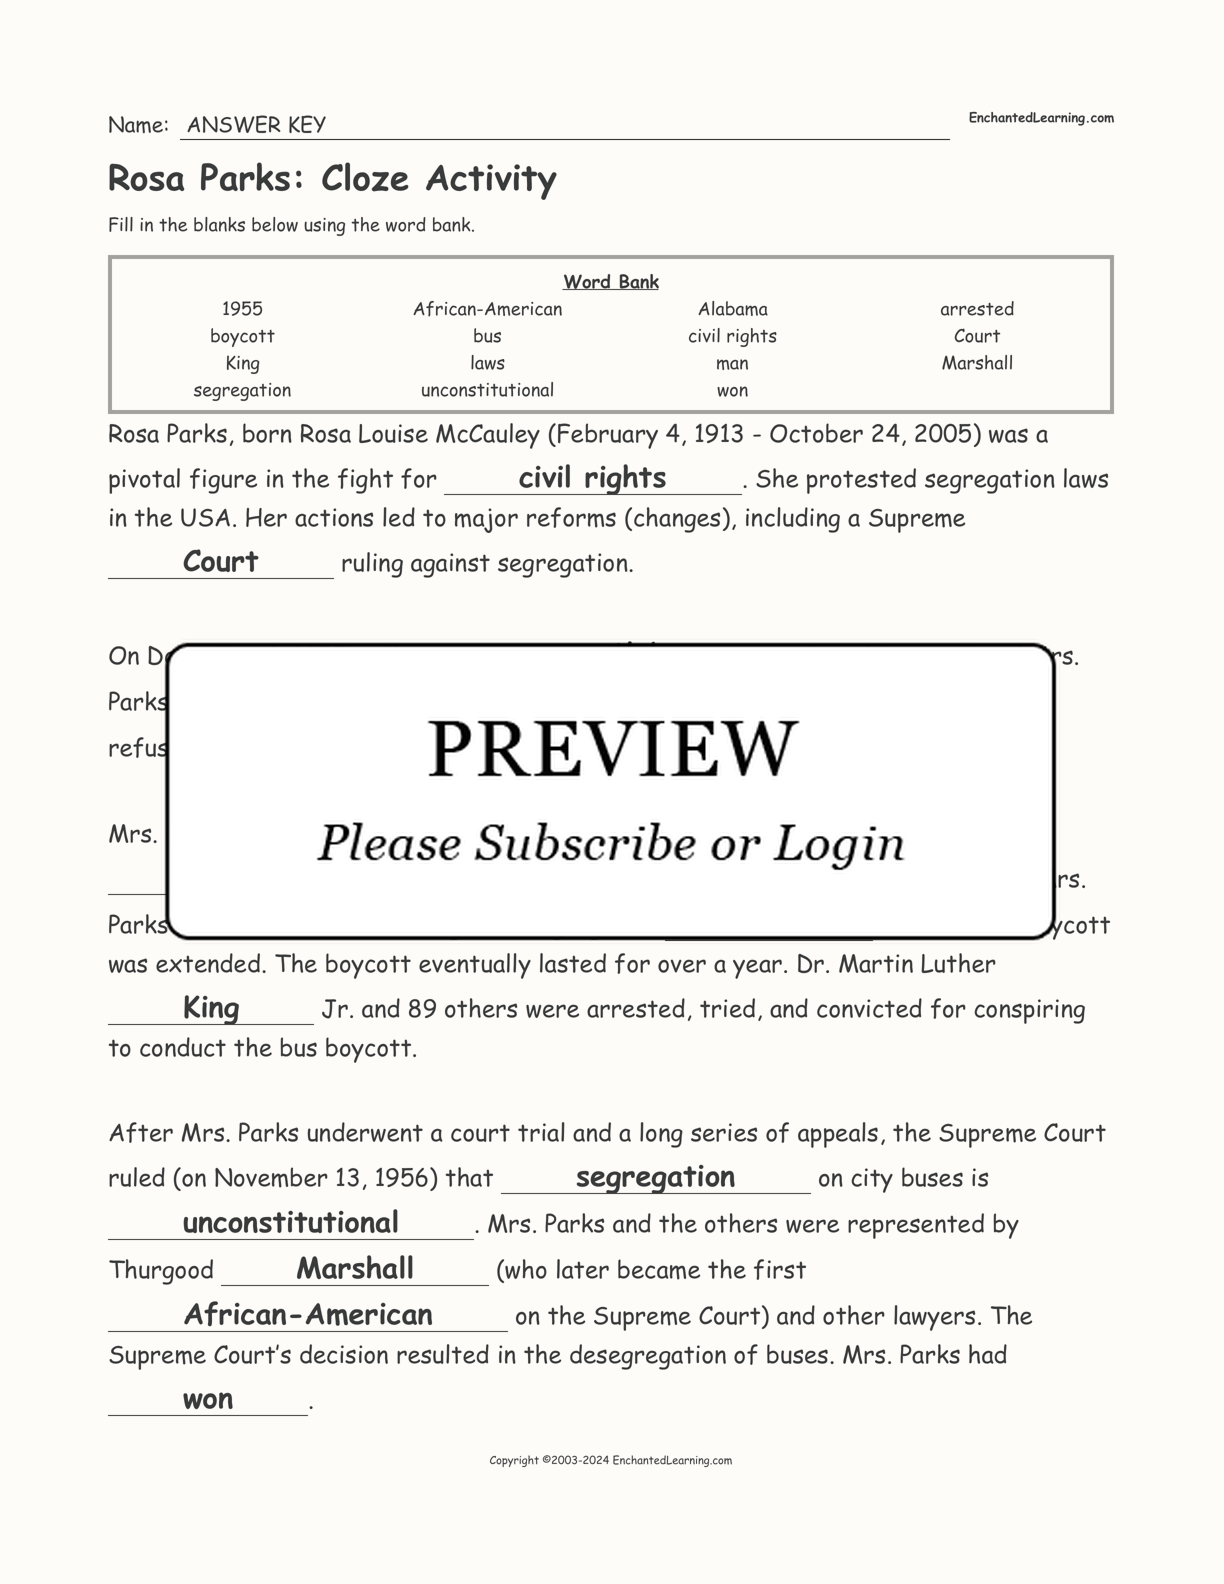 Rosa Parks: Cloze Activity interactive worksheet page 2